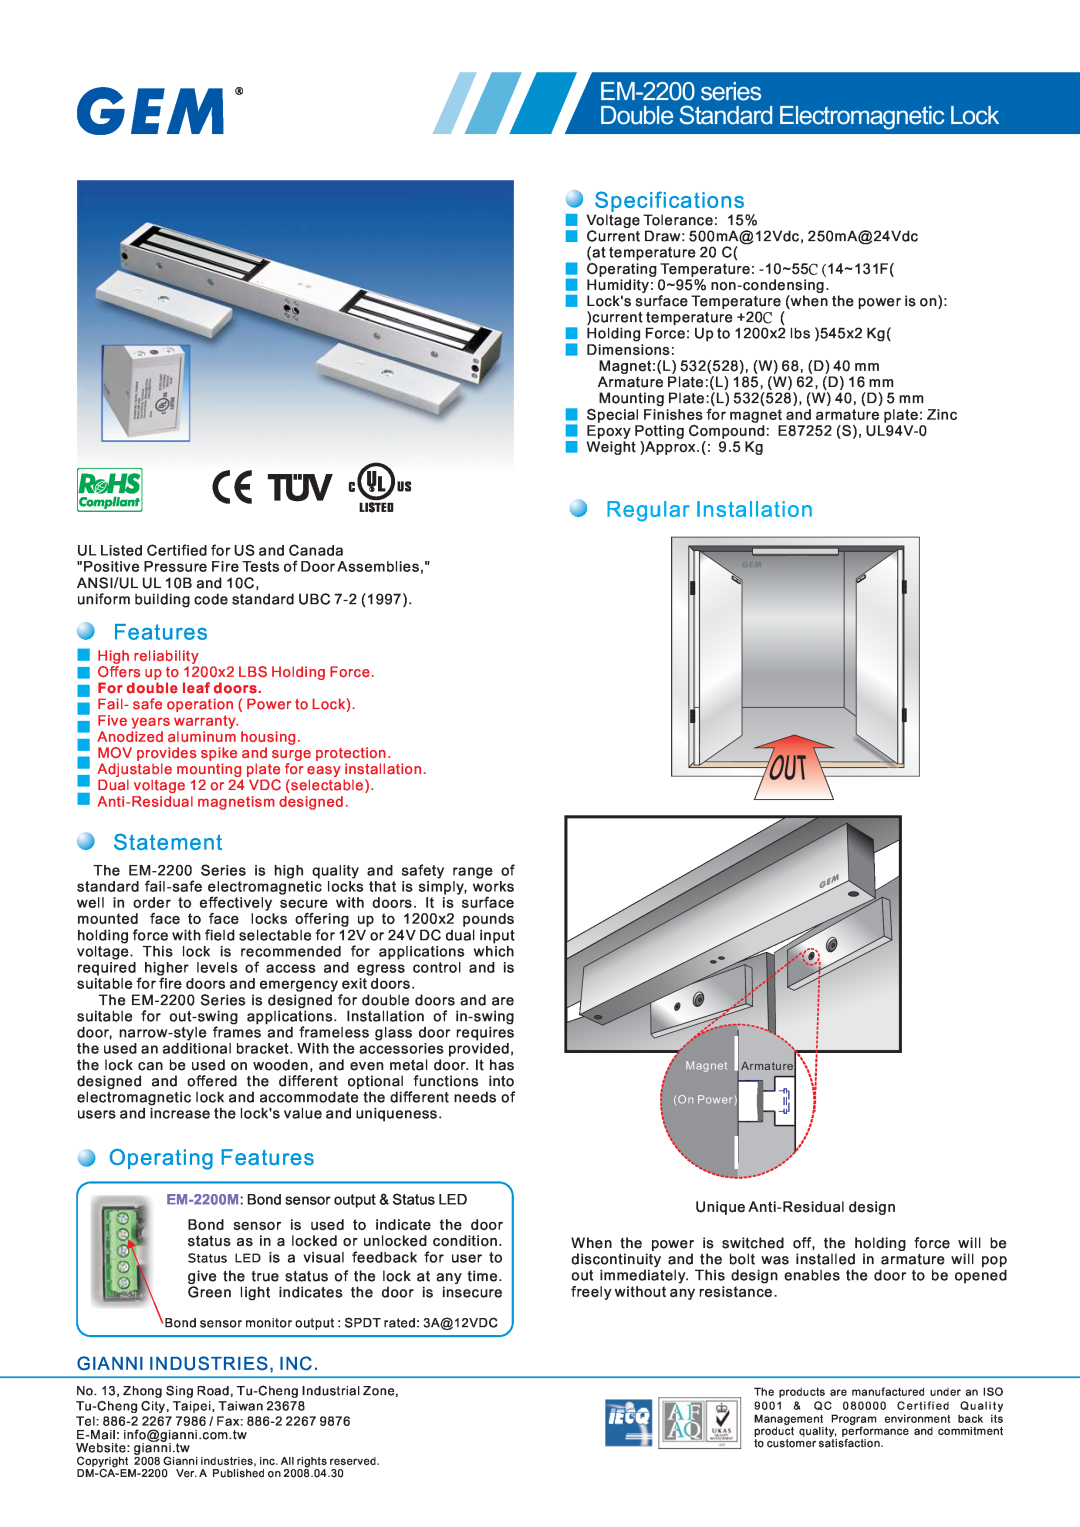 Gianni Industries specifications EM-2200 series Double Standard Electromagnetic Lock, Features, Statement 